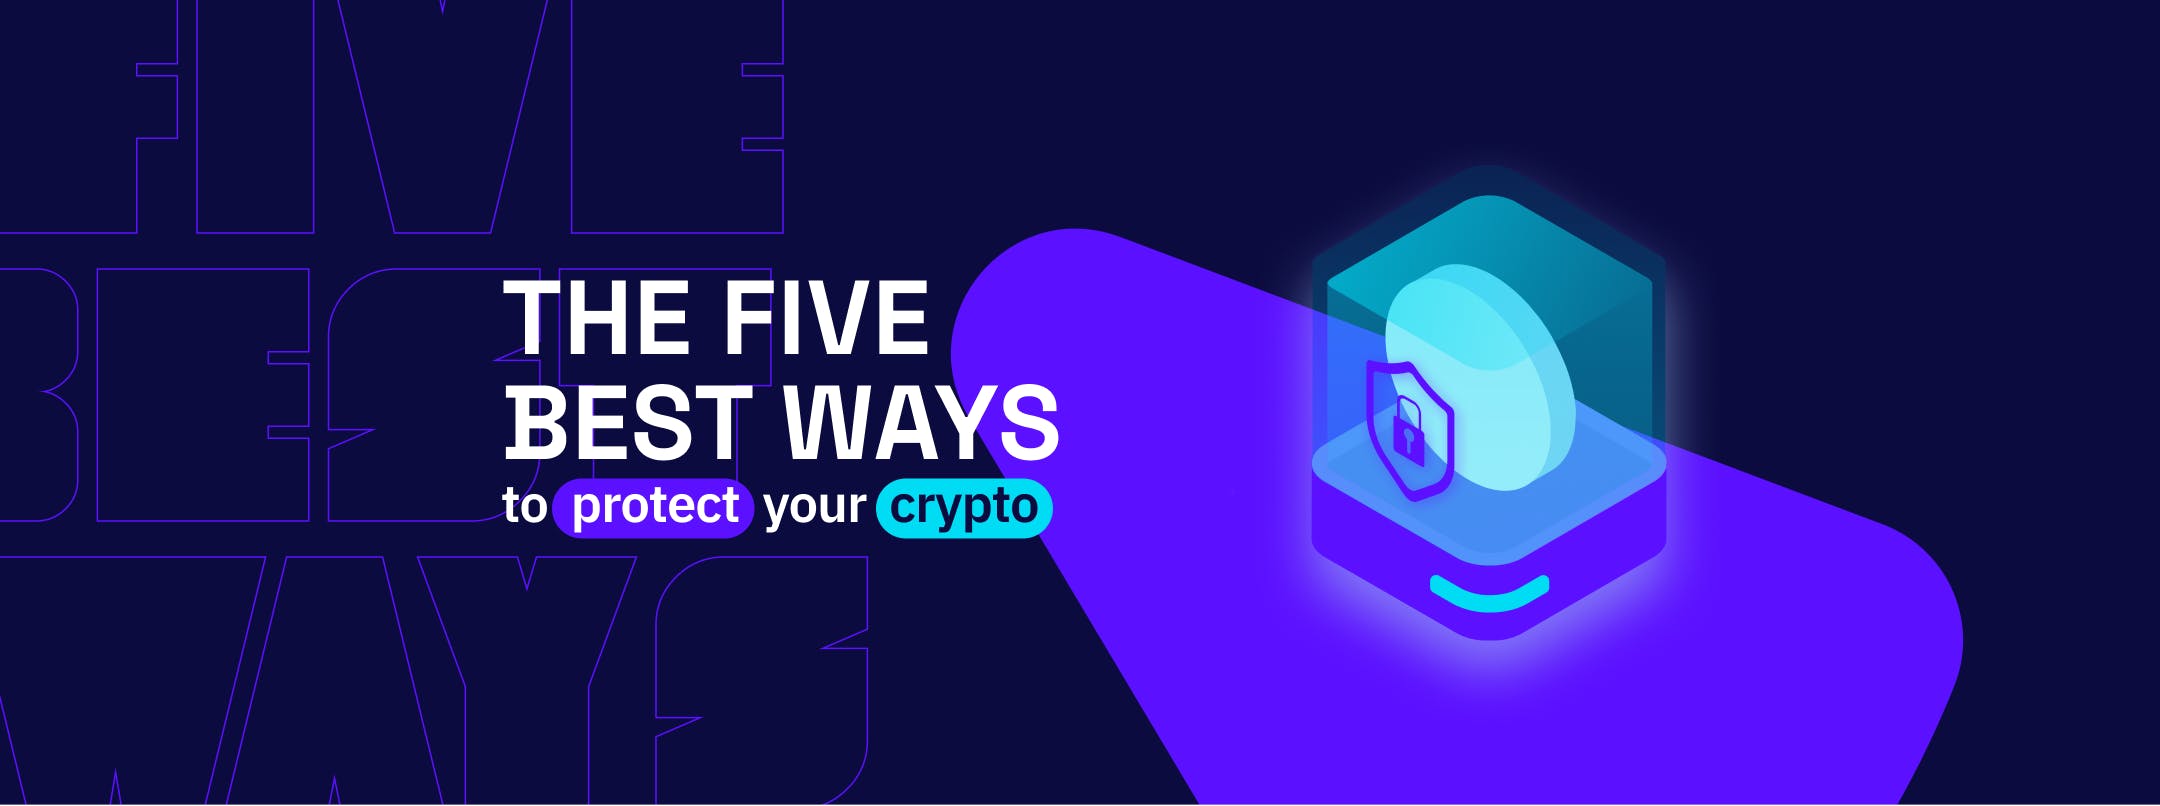 Here’s a New Year Resolution For You: 5 Best Ways to Protect Your Crypto